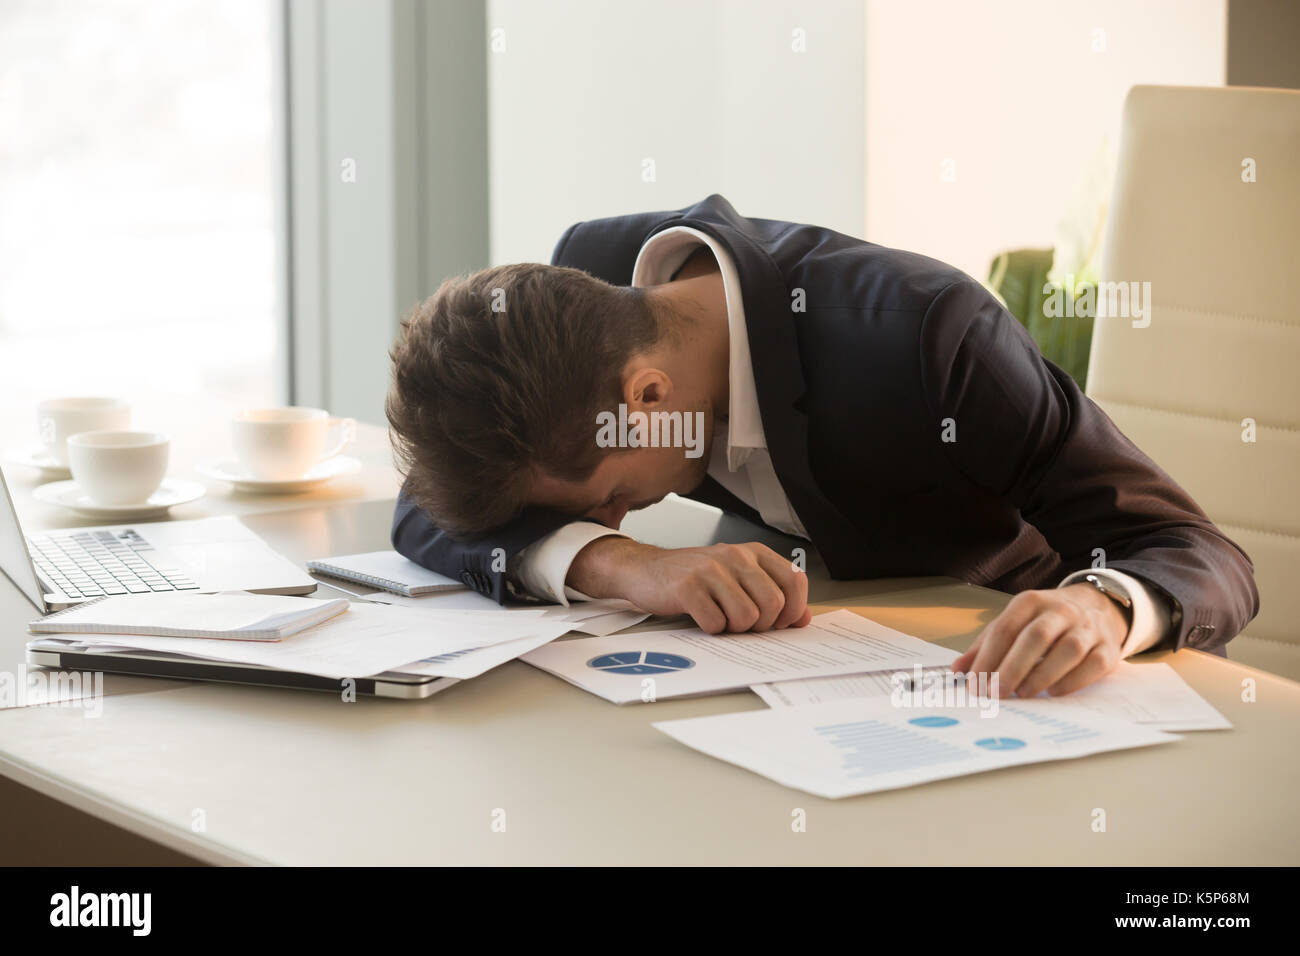 Tired young businessman sleeping on desk in office Stock Photo